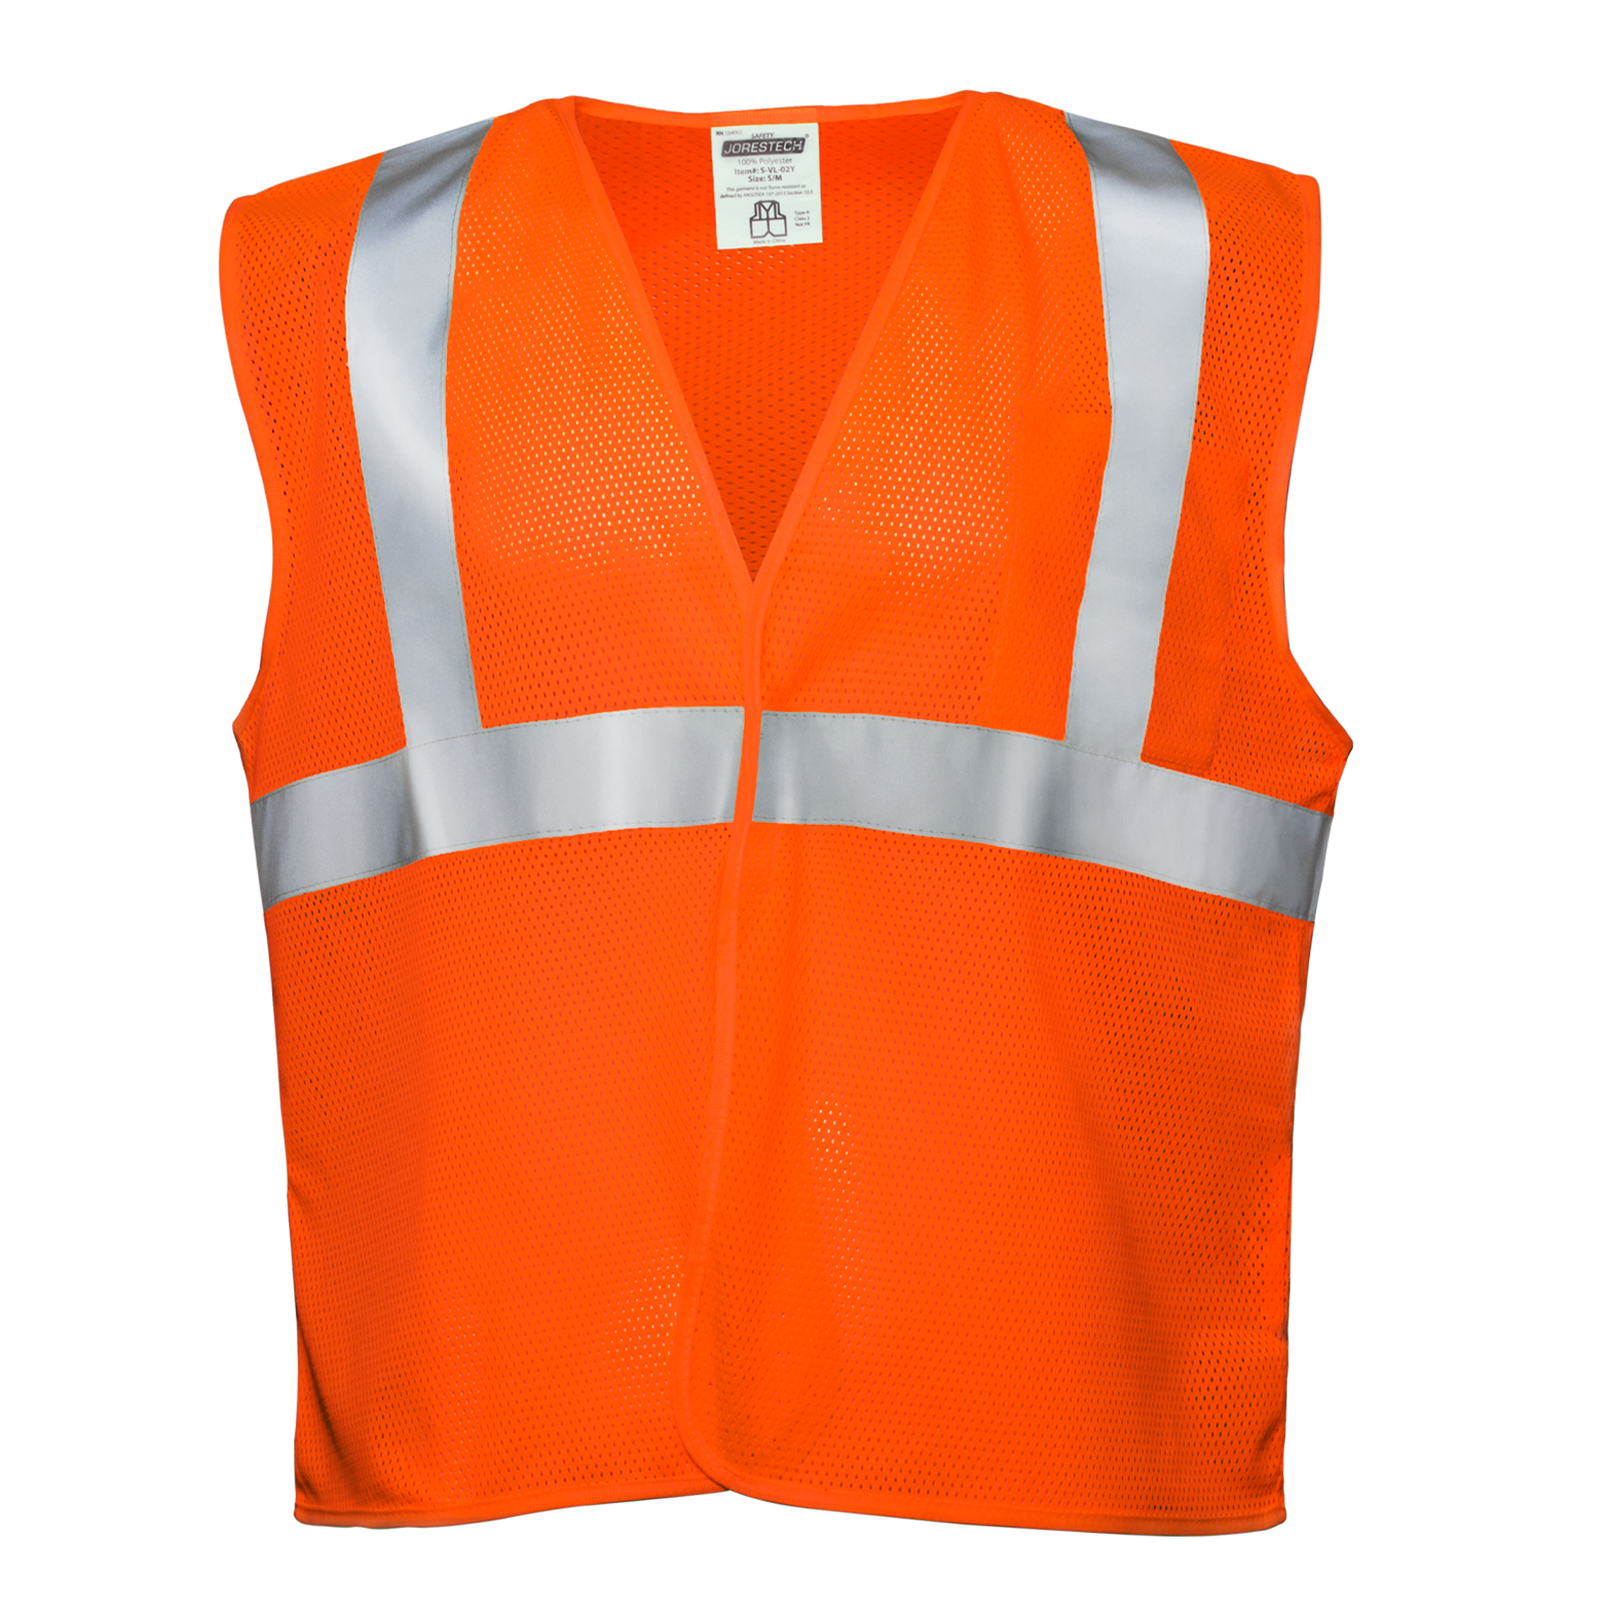 ANSI/ISEA, Type R Class 2 Orange safety vest with 2 inches reflective strip